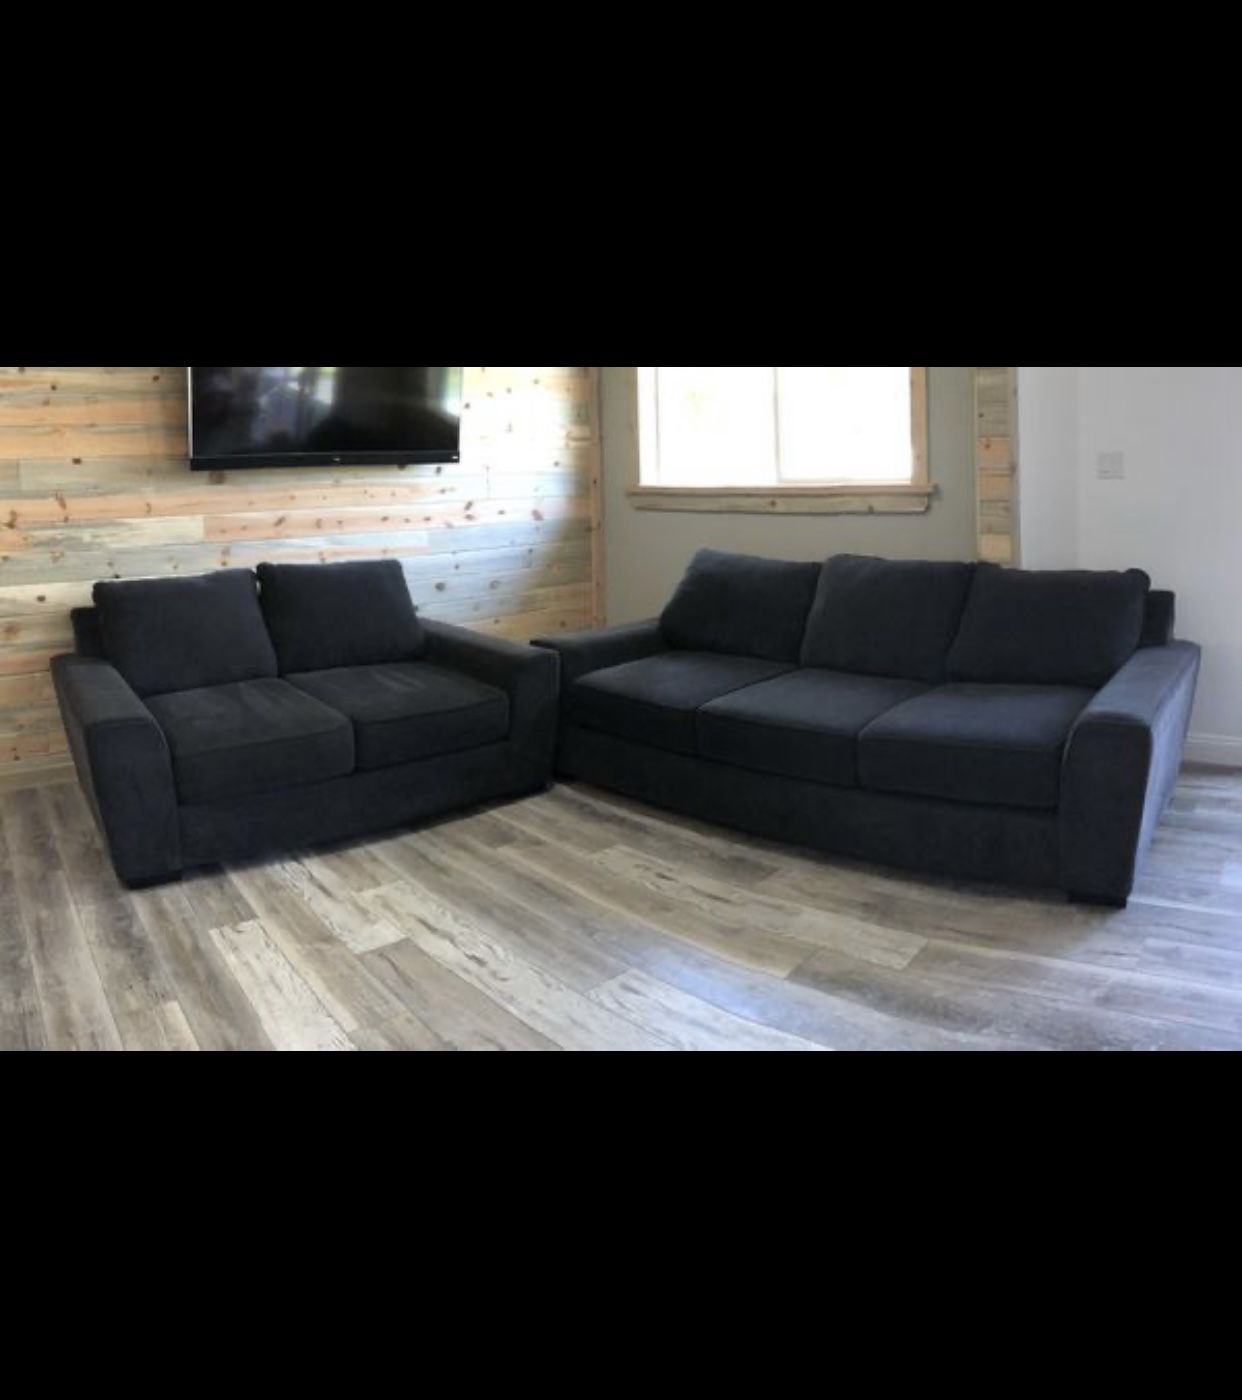 Charcoal grey couch set